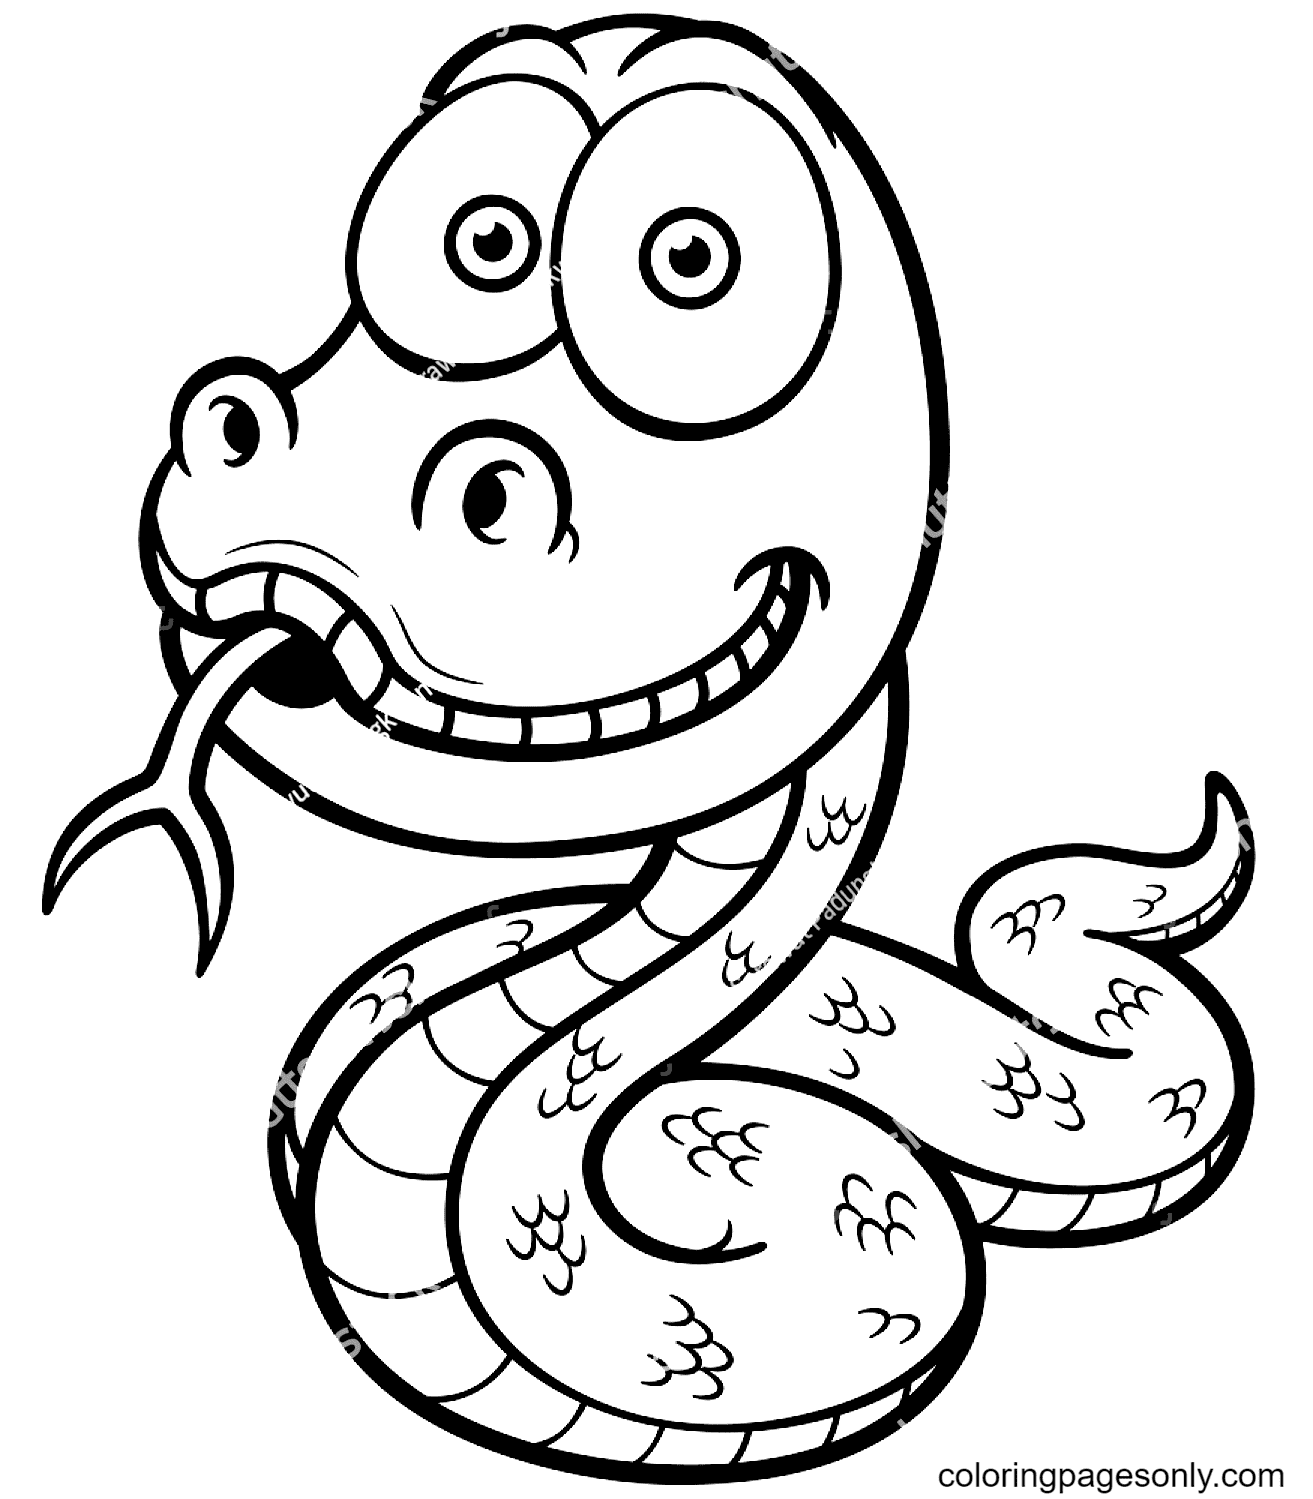 Cartoon Snake Printable Coloring Pages